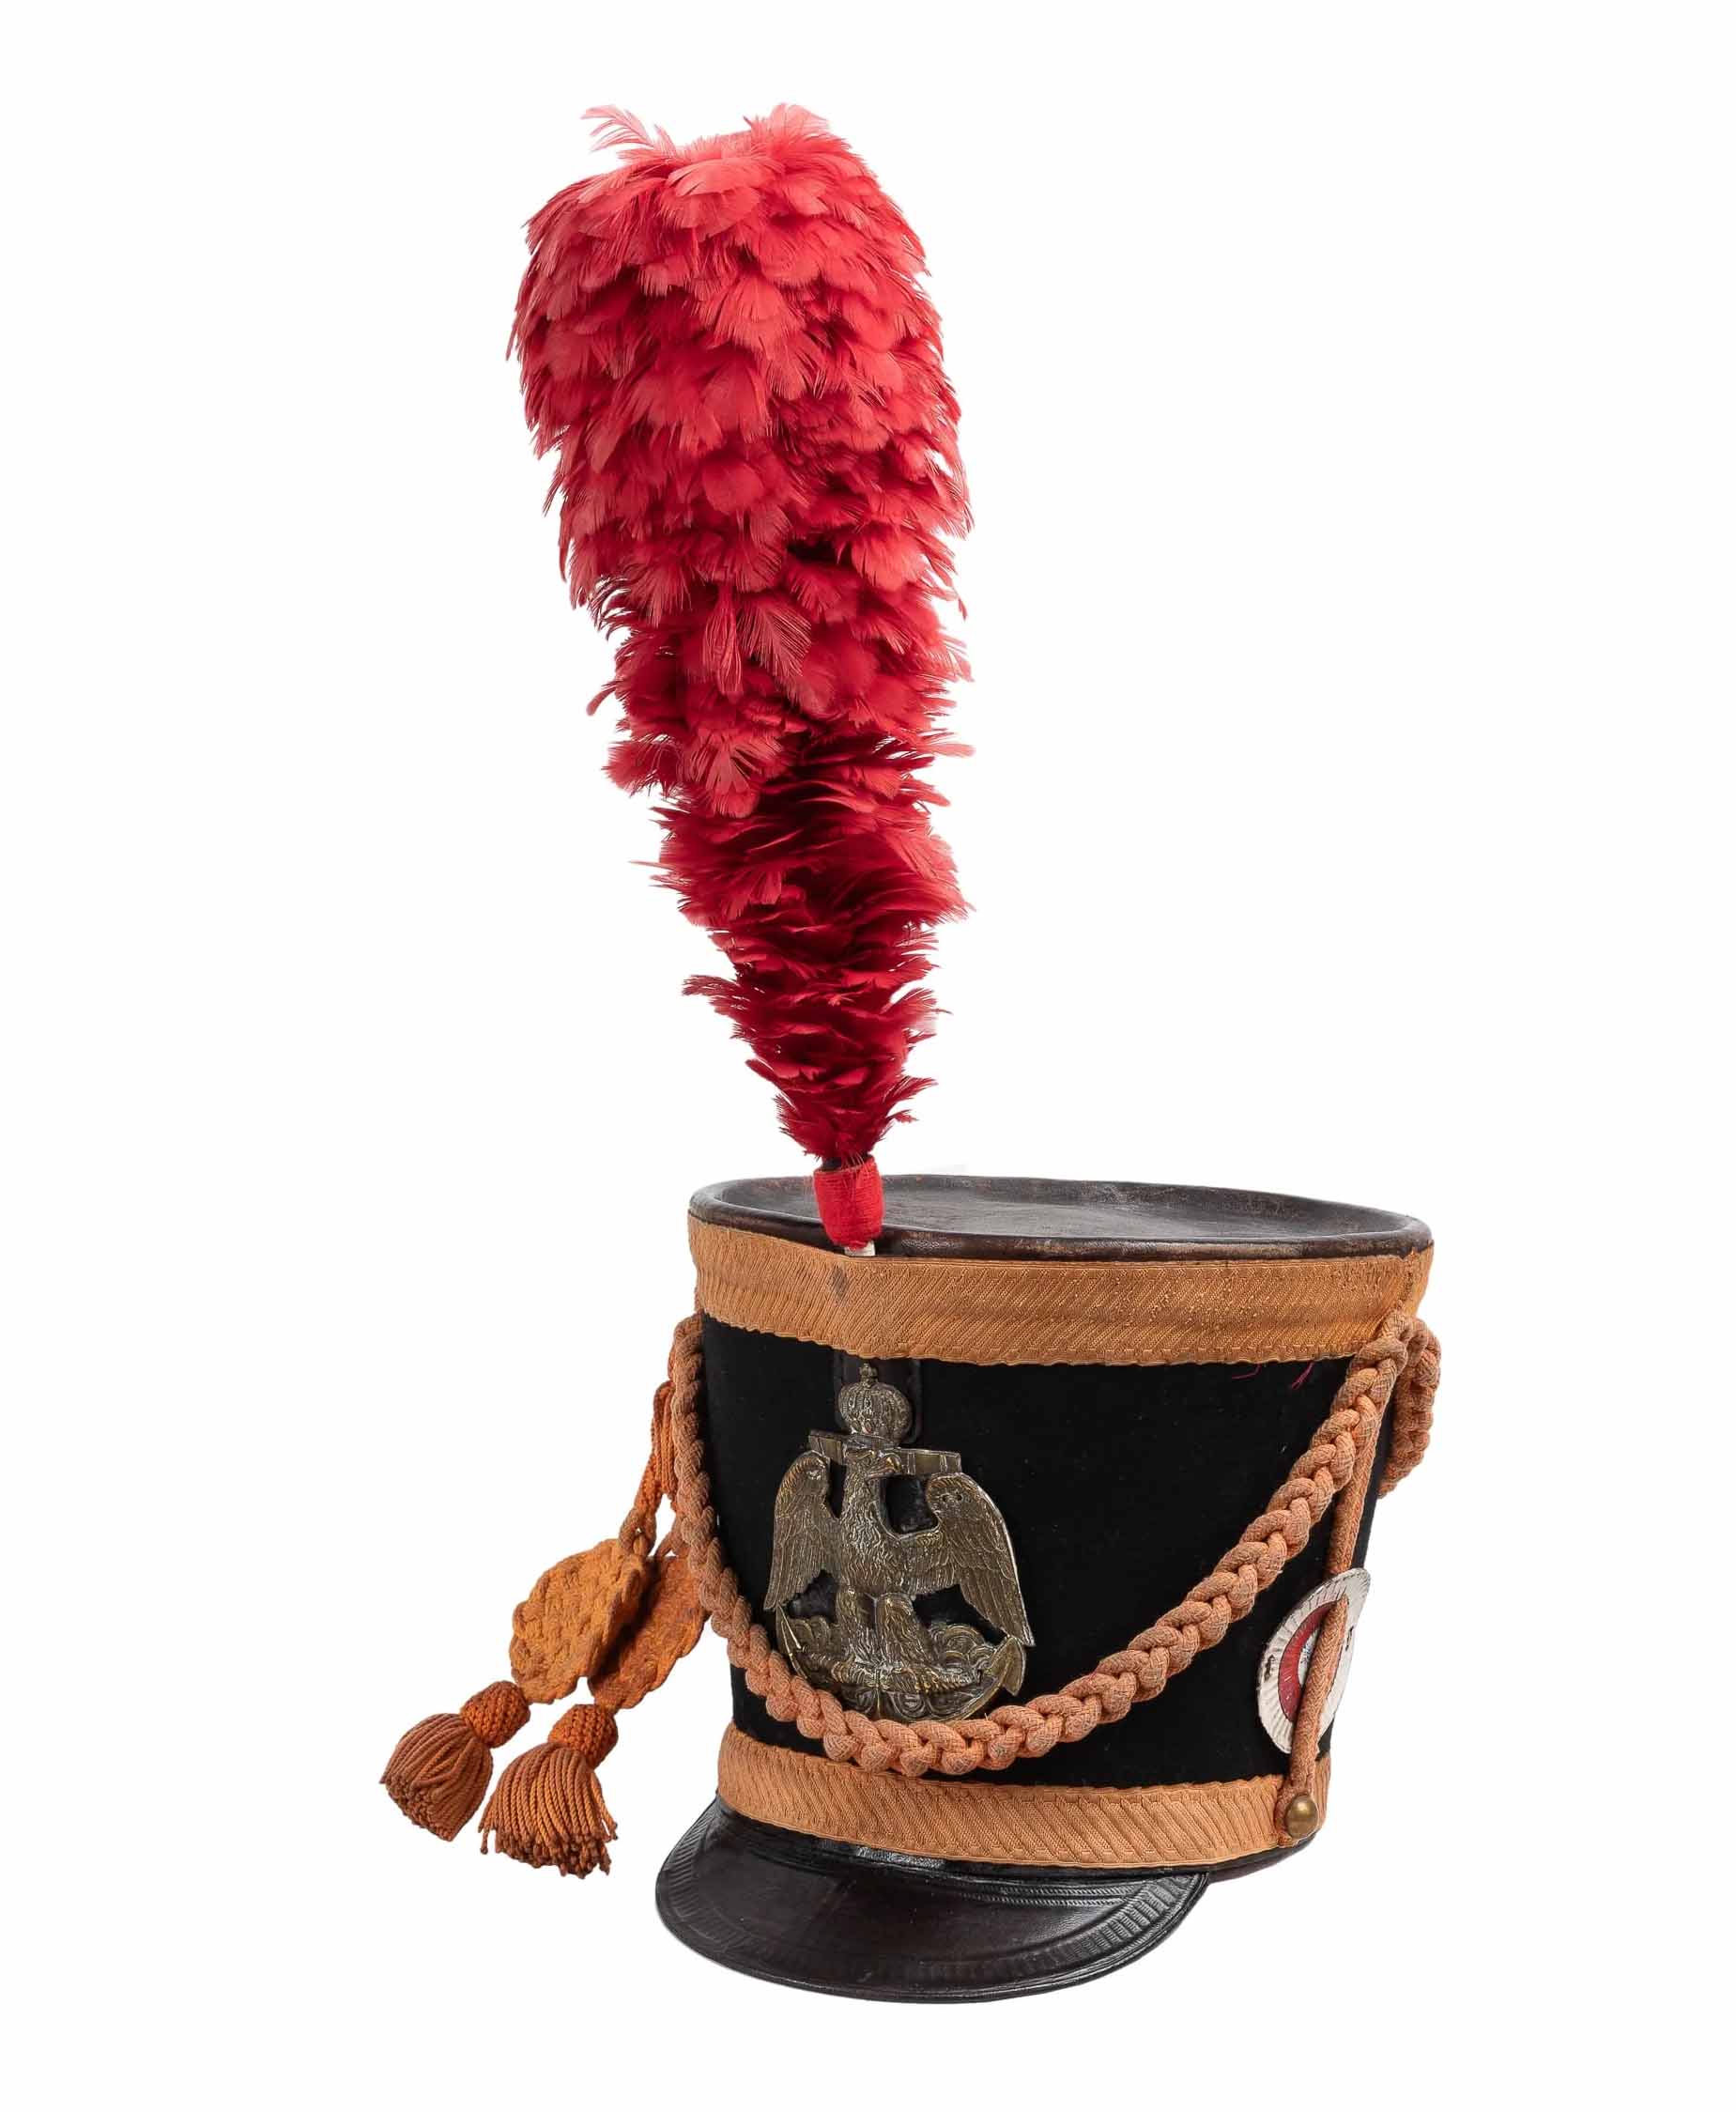 French Imperial Garde Marine shako, estimated at $20,000-$30,000 at Potter & Potter May 23.